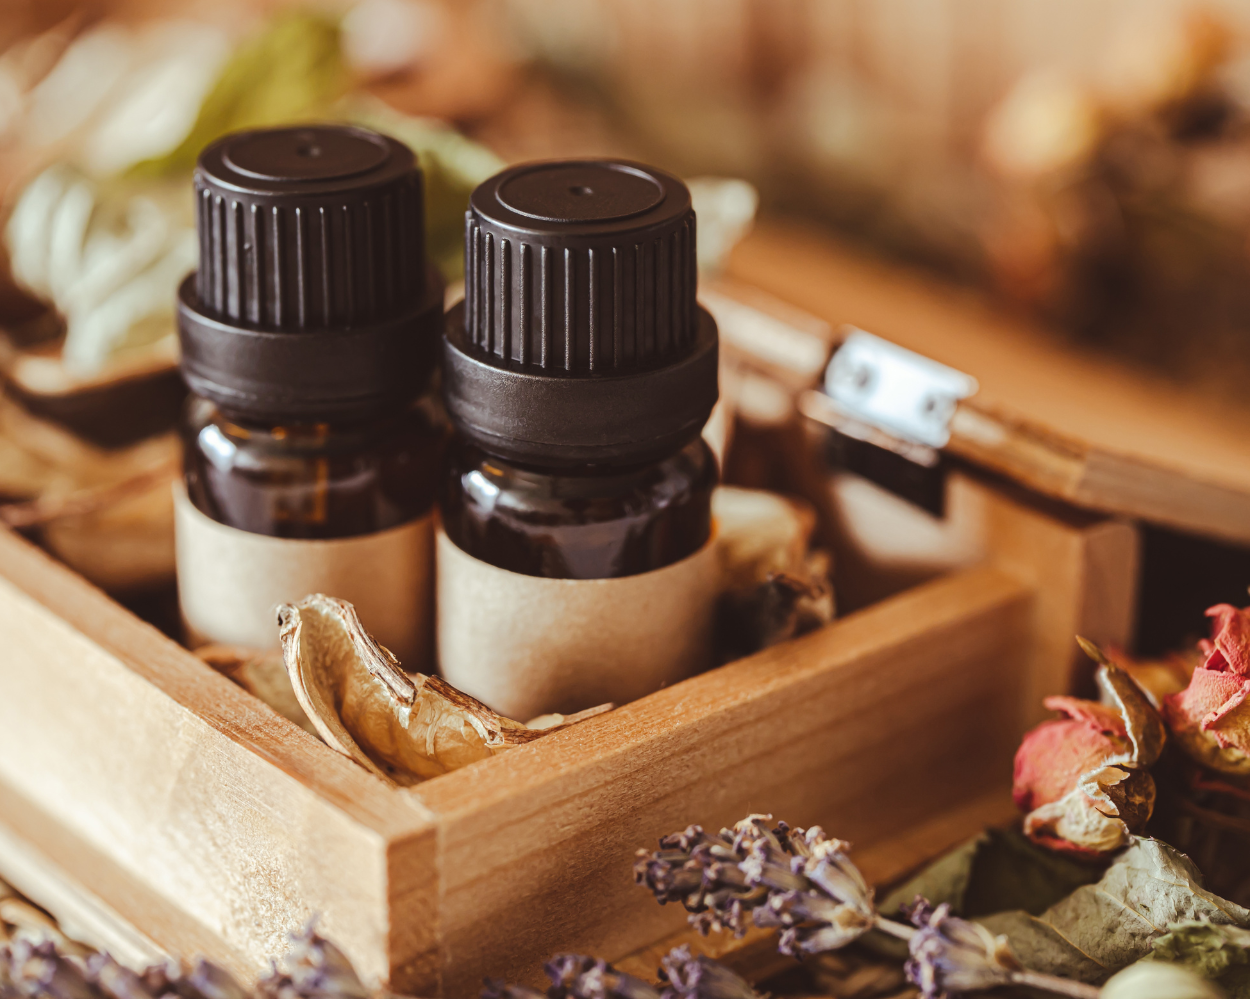 Two small essential oil bottles in a wooden box surrounded by dried flowers and herbs.